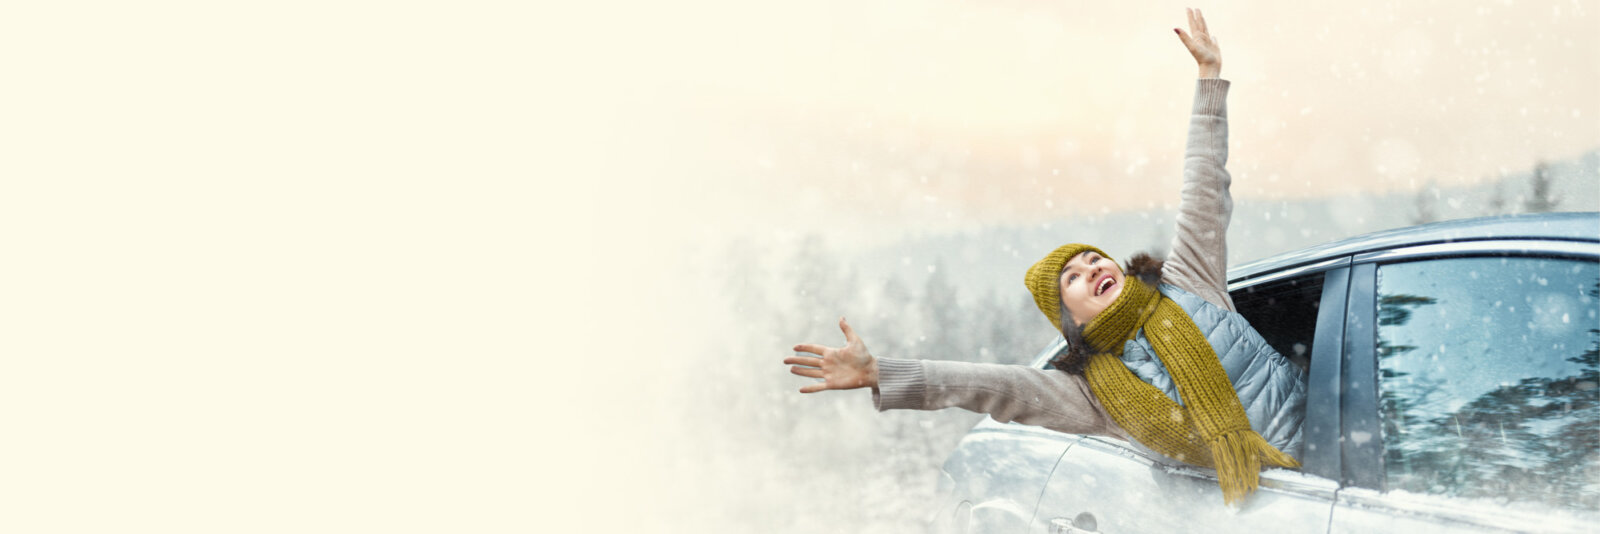 Excited Woman Arms Extended out of car on snowy day